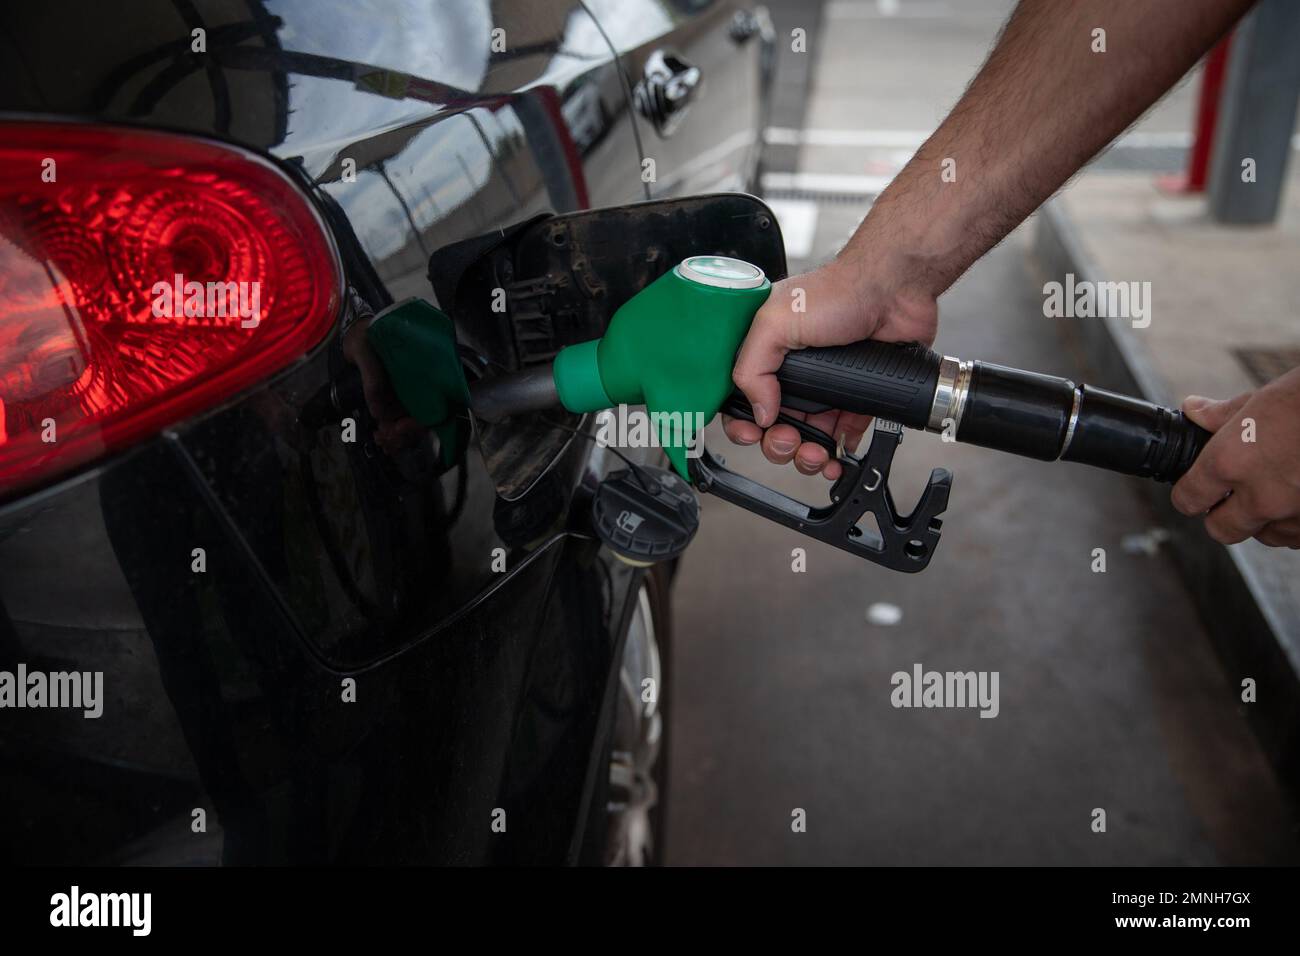 A man refuels his car, close-up on the hand holding the gas nozzle Stock Photo